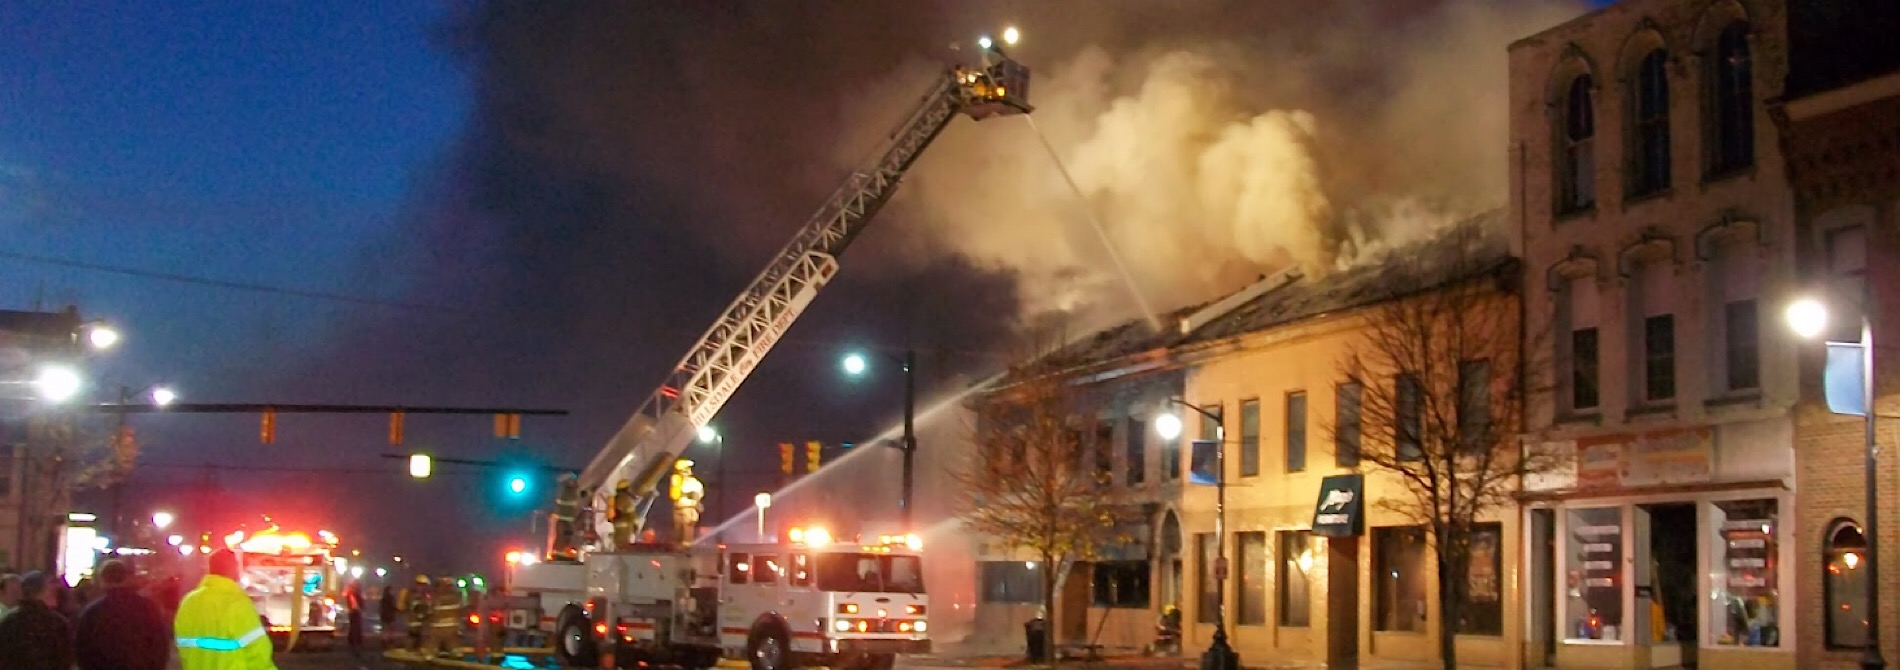 firefighter on ladder truck spraying water on burning building at night